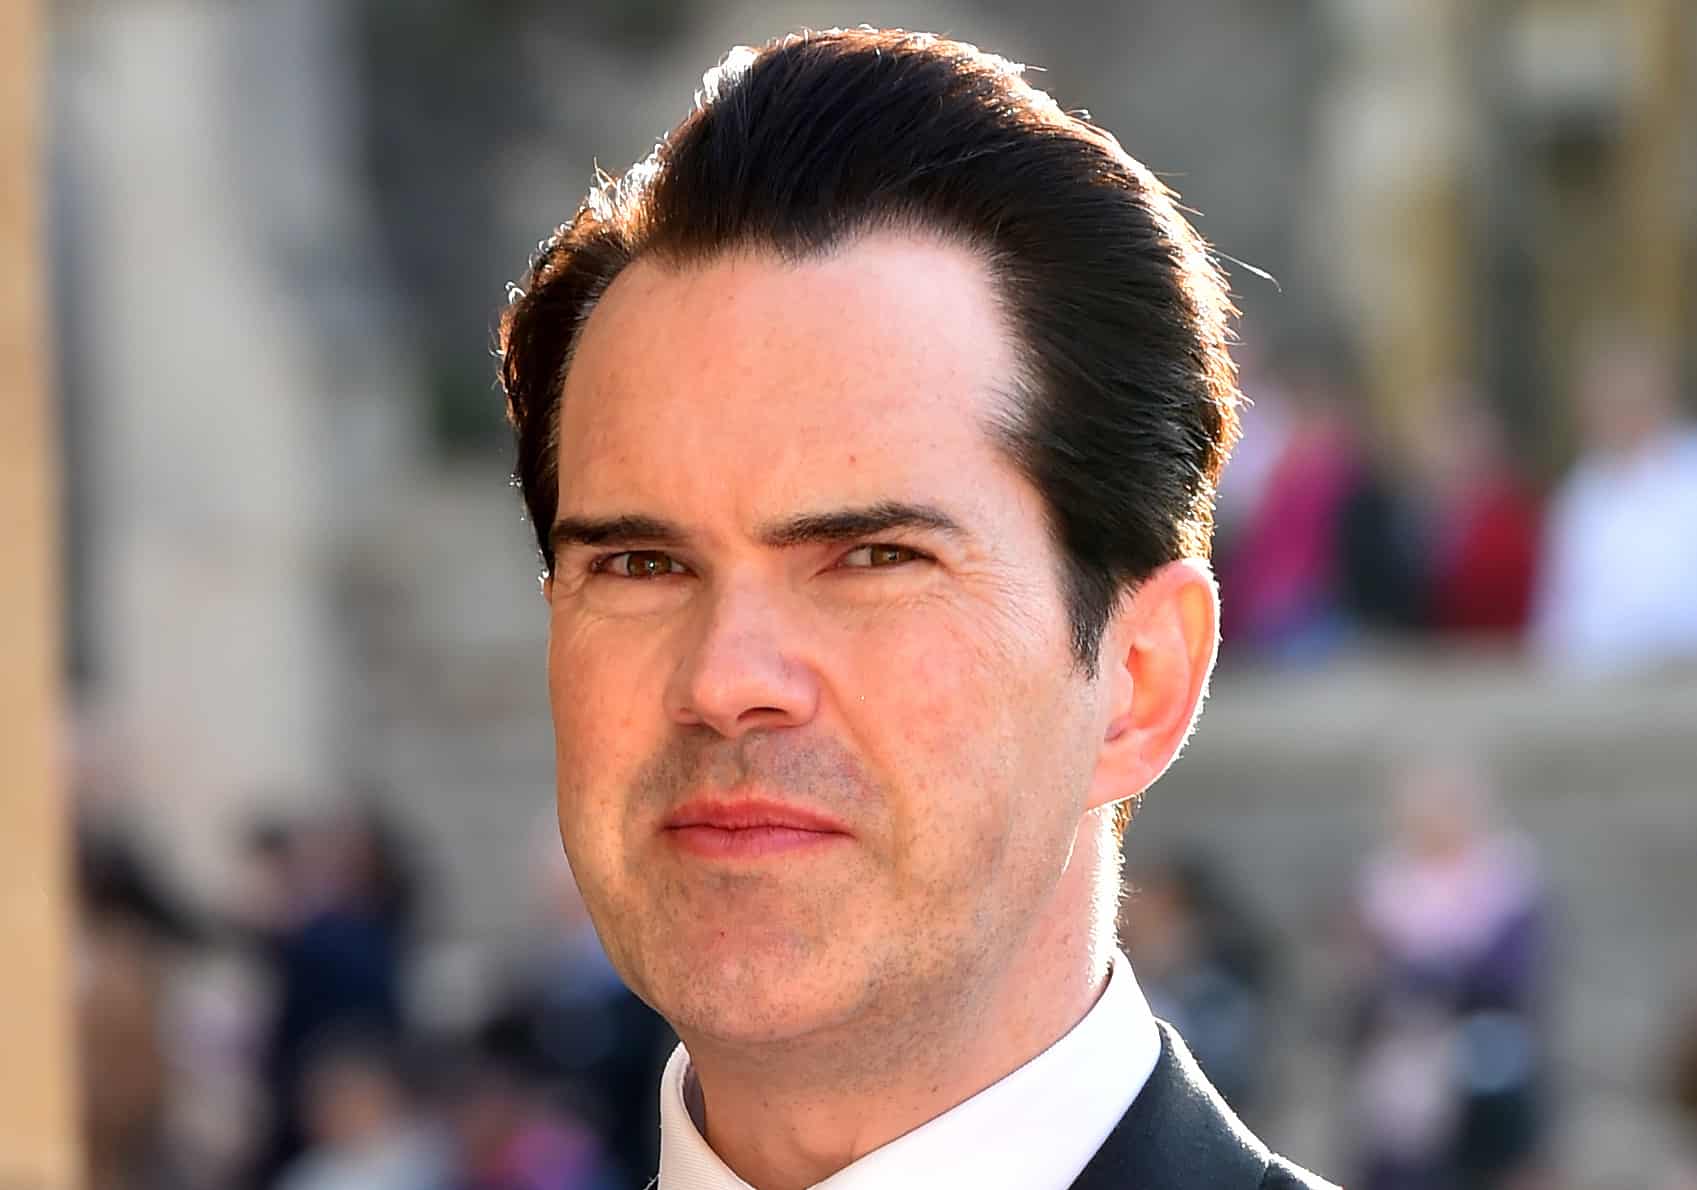 Watch: Jimmy Carr destroys Anti-Vaxxer in audience with killer line